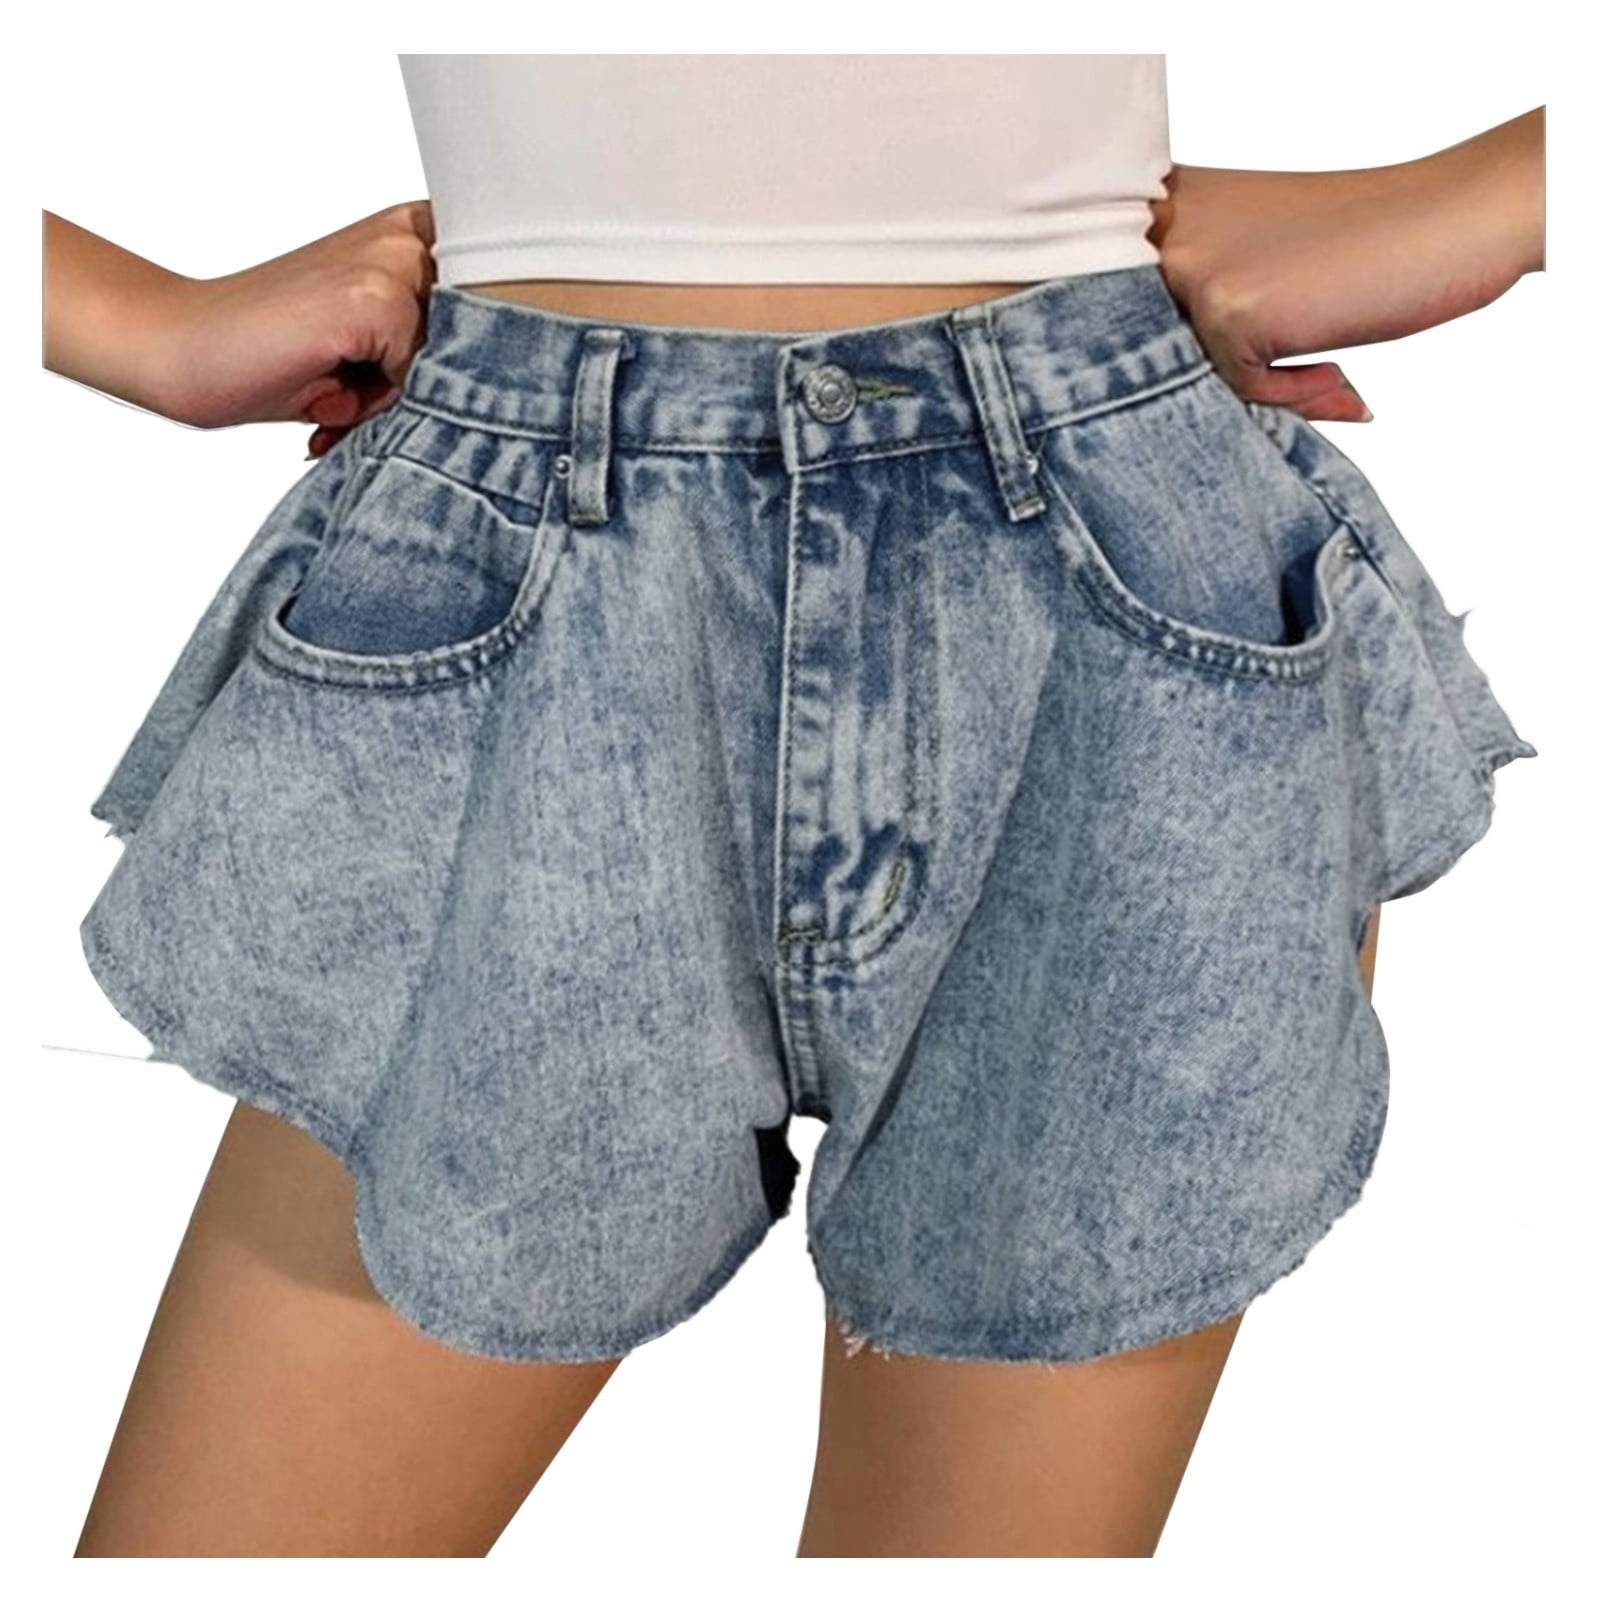 Fudule Women Vintage Jeans High Waist Hole Short Hot Pants Ladies Summer Outfits Button Fly Denim Shorts with Pockets 